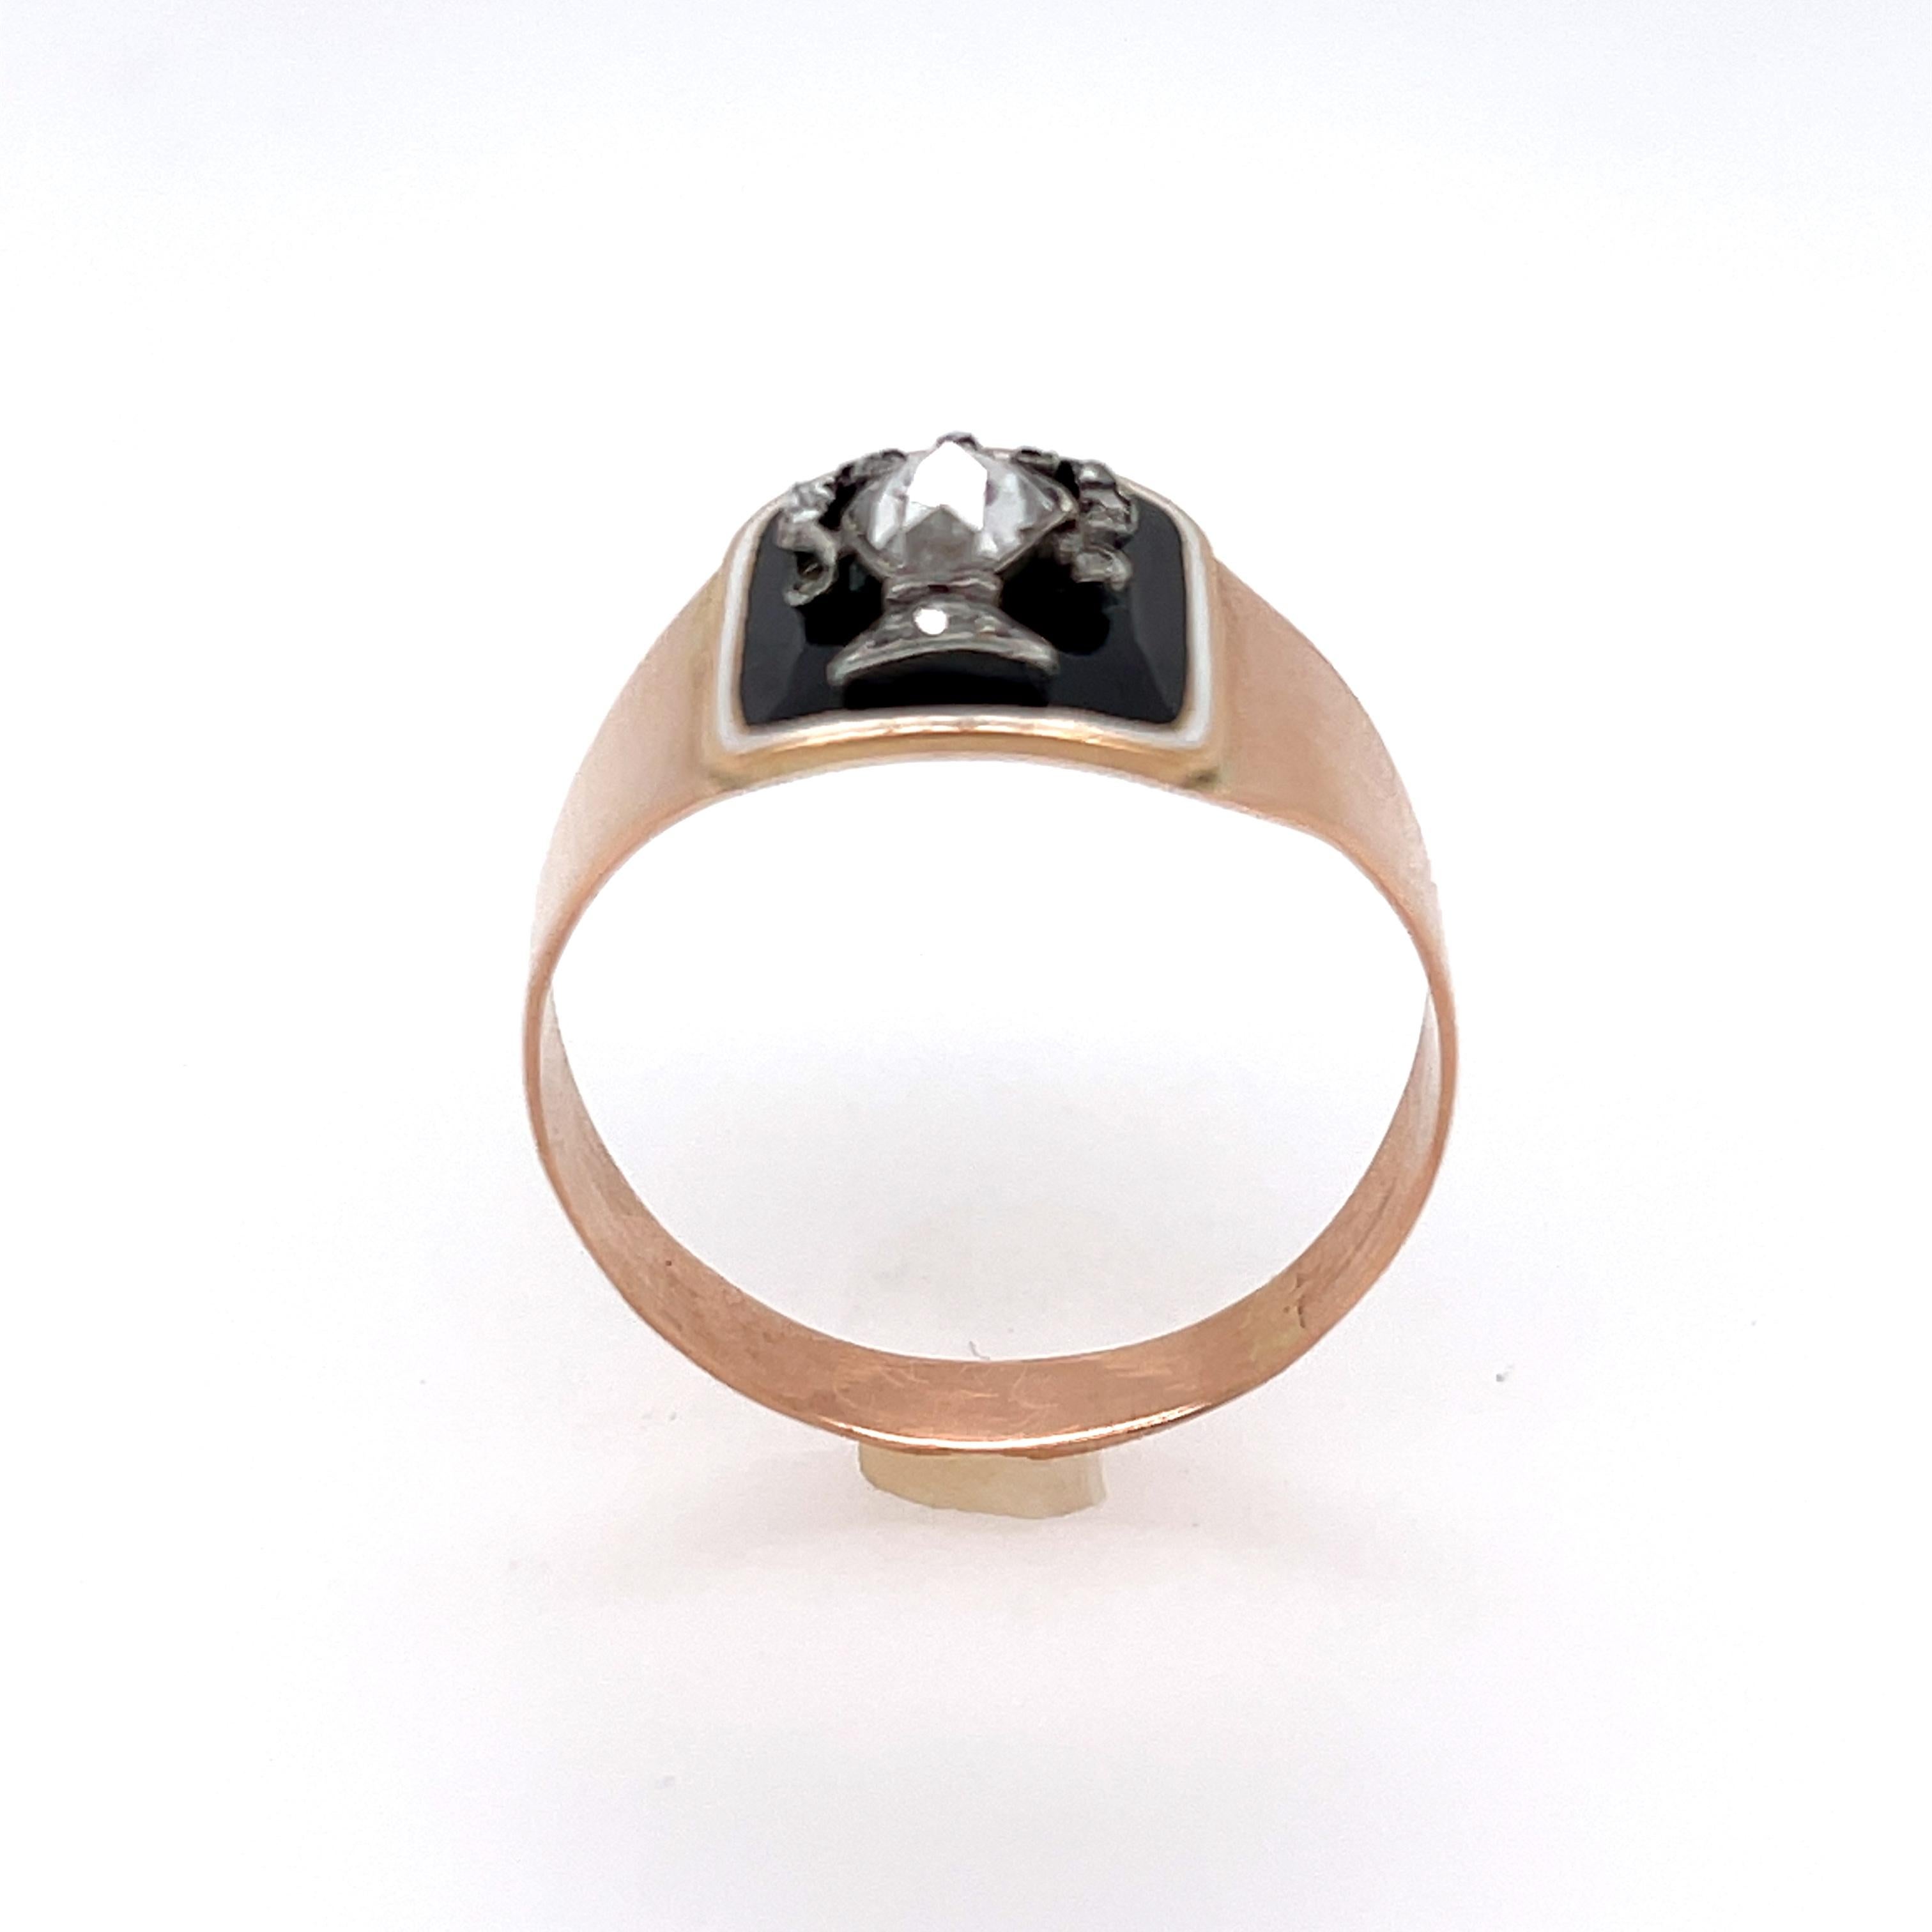 An antique rosecut diamond enamel memorial ring made in 14k yellow gold dated 1798. The ring is an attractive thin band that has a plaque on top with black enamel and set with a pear shape rosecut diamond that is styled as an urn. It is a sleek and